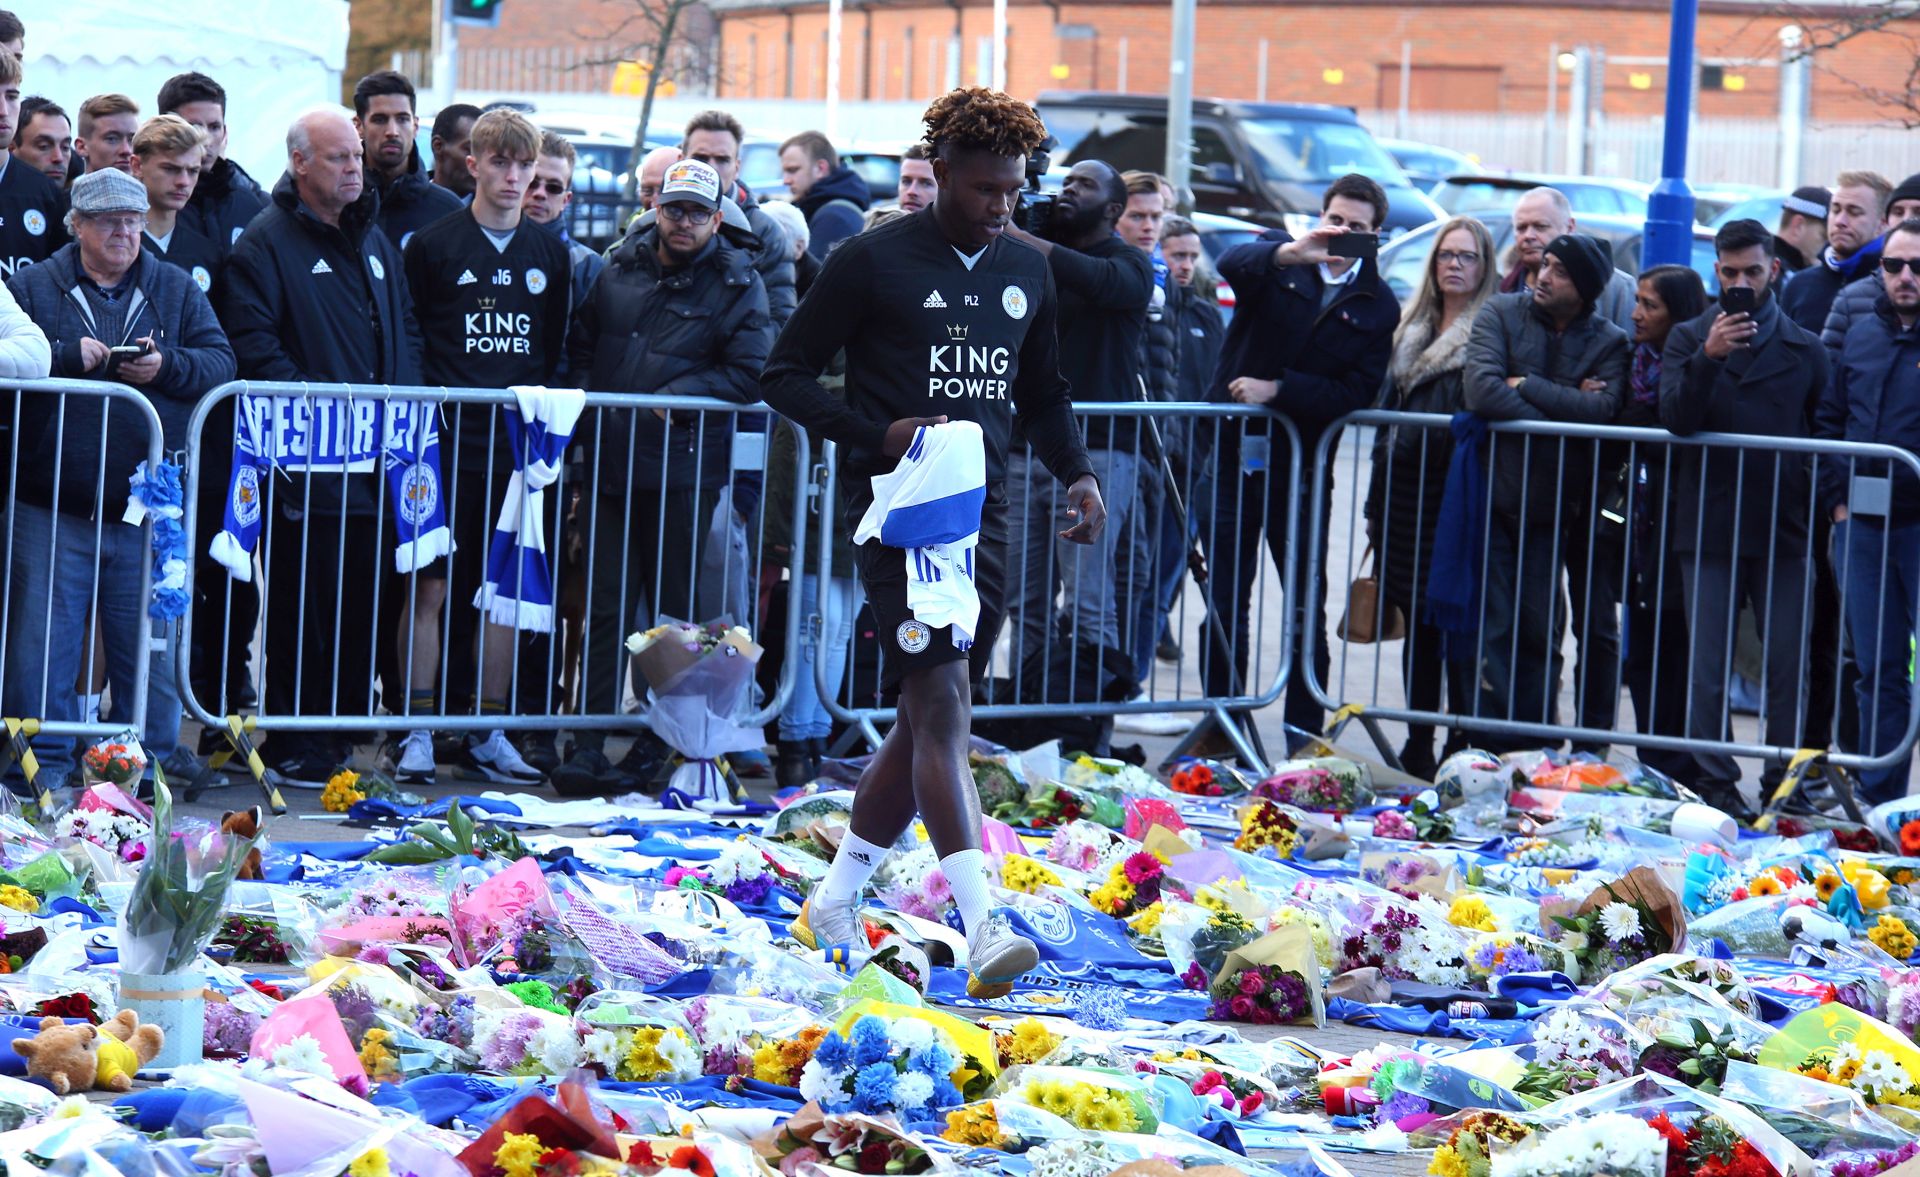 epa07129584 Leicester City's academy player Darnell Johnson lays a t-shirt outside the King Power stadium in Leicester, Britain, 29 October 2018. According to reports on 27 October 2018, a helicopter of Leicester City owner Vichai Srivaddhanaprabha, has crashed and burst into flames outside King Power Stadium in Leicester after the Premier League soccer match between Leicester City and West Ham United. Leicestershire Police state on 29 October 2018 that the five people were on board the helicopter when the incident happened. While formal identification has not yet taken place, they are believed to be Leicester City Football Club chairman Vichai Srivaddhanaprabha, two members of his staff, Nusara Suknamai and Kaveporn Punpare, pilot Eric Swaffer and passenger Izabela Roza Lechowicz.  EPA/TIM KEETON